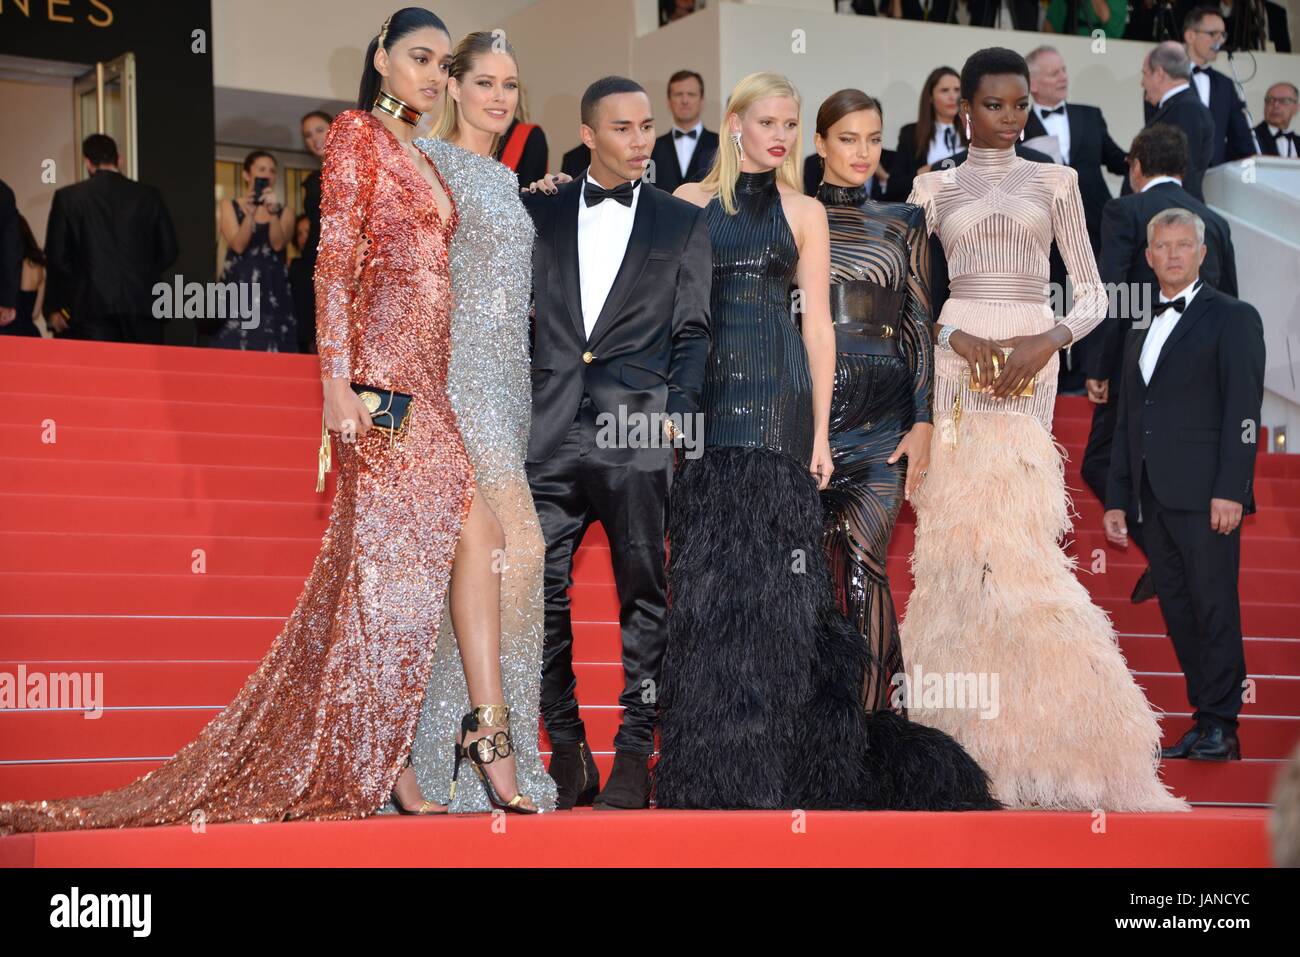 Models Neelam Gill, Doutzen Kroes, Lara Stone, Irina Shayk and Maria Borges with designer Olivier Rousteing  Arriving on the red carpet for the film 'The Beguiled'  70th Cannes Film Festival  May 24, 2017 Photo Jacky Godard Stock Photo